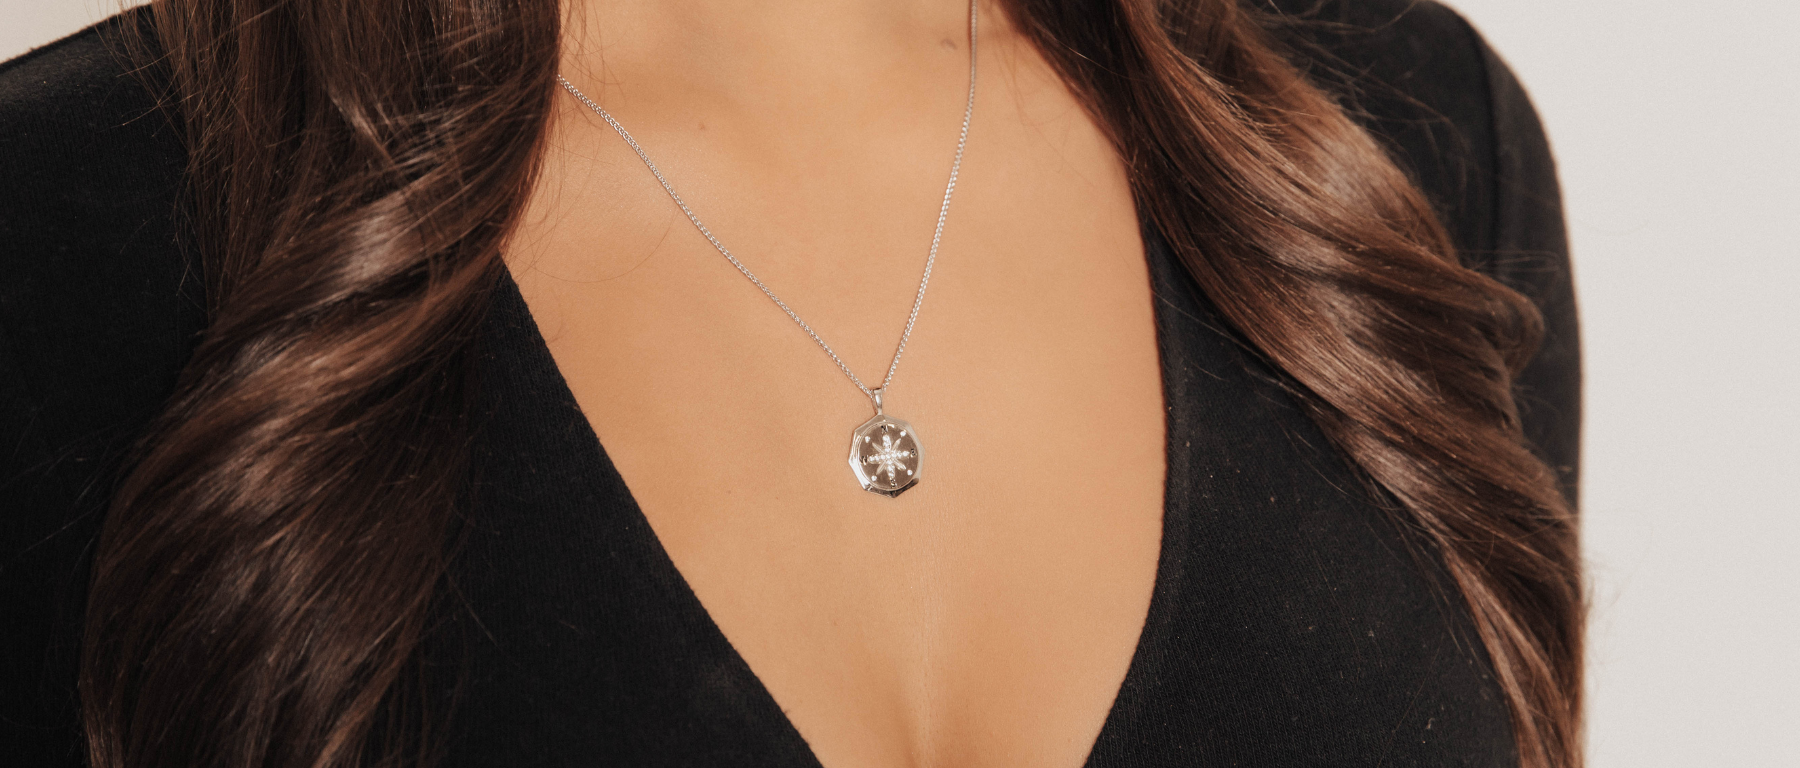 True North Compass Pendant With CZ Accents